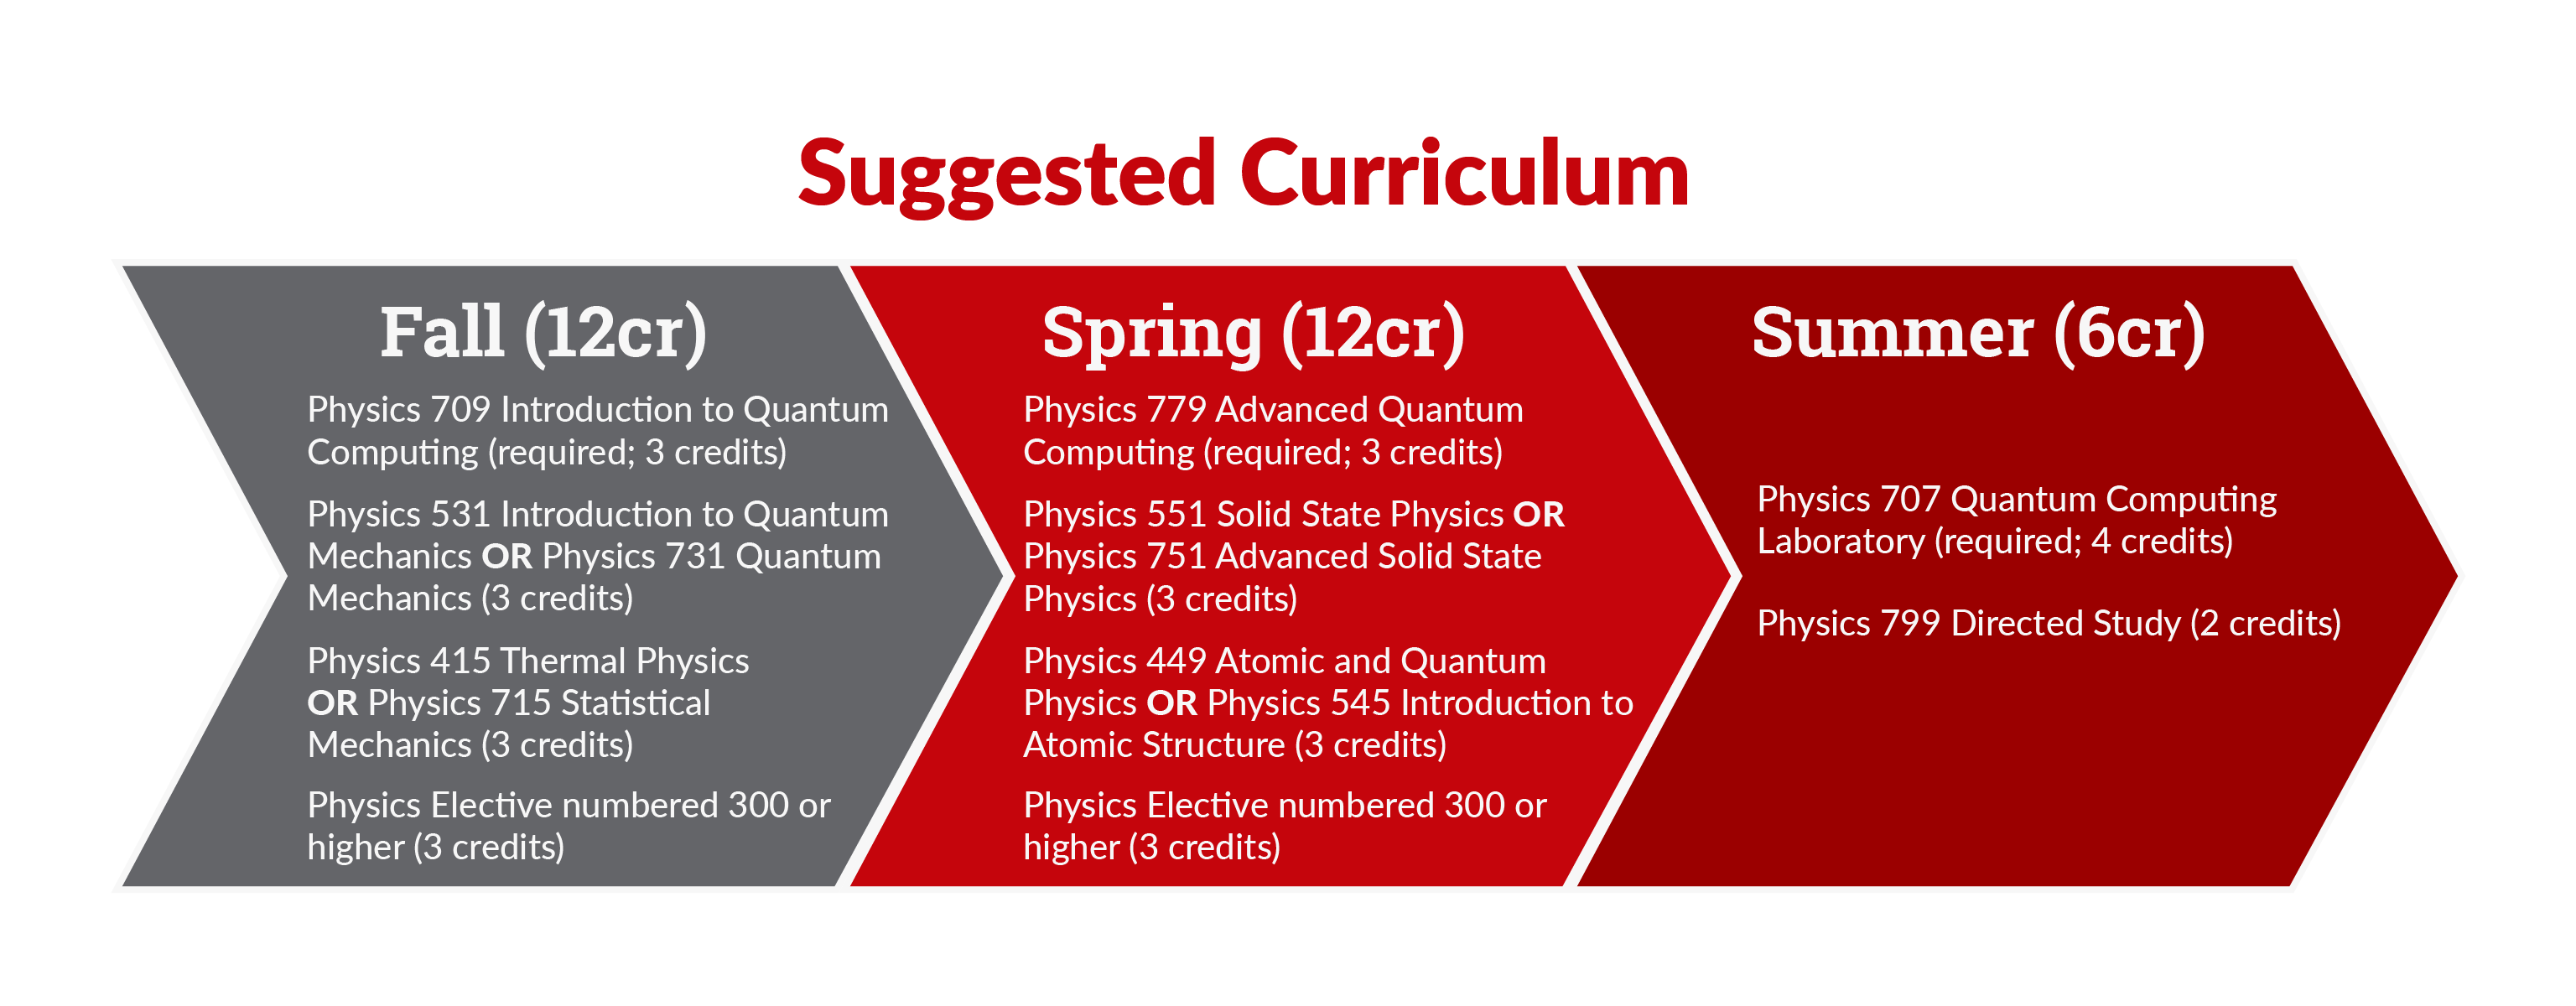 SUGGESTED CURRICULUM Fall Semester: Physics 709 Introduction to Quantum Computing (required, 3 credits) Physics 531 Introduction to Quantum Mechanics or 731 Quantum Mechanics (3 credits) Physics 415 Thermal Physics or 715 Statistical Mechanics (3 credits) Physics Elective (numbered 300 or higher, 3 credits) Spring Semester: Physics 779 Advanced Quantum Computing (required, 3 credits) Physics 551 Solid State Physics or 751 Advanced Solid State Physics (3 credits) Physics 449 Atomic and Quantum Physics or 545 Introduction to Atomic Structure (3 credits) Physics Elective (numbered 300 or higher, 3 credits) Summer Semester: Physics 707 Quantum Computing Laboratory (required, 4 credits) Physics 799 Directed Study (2 credits)